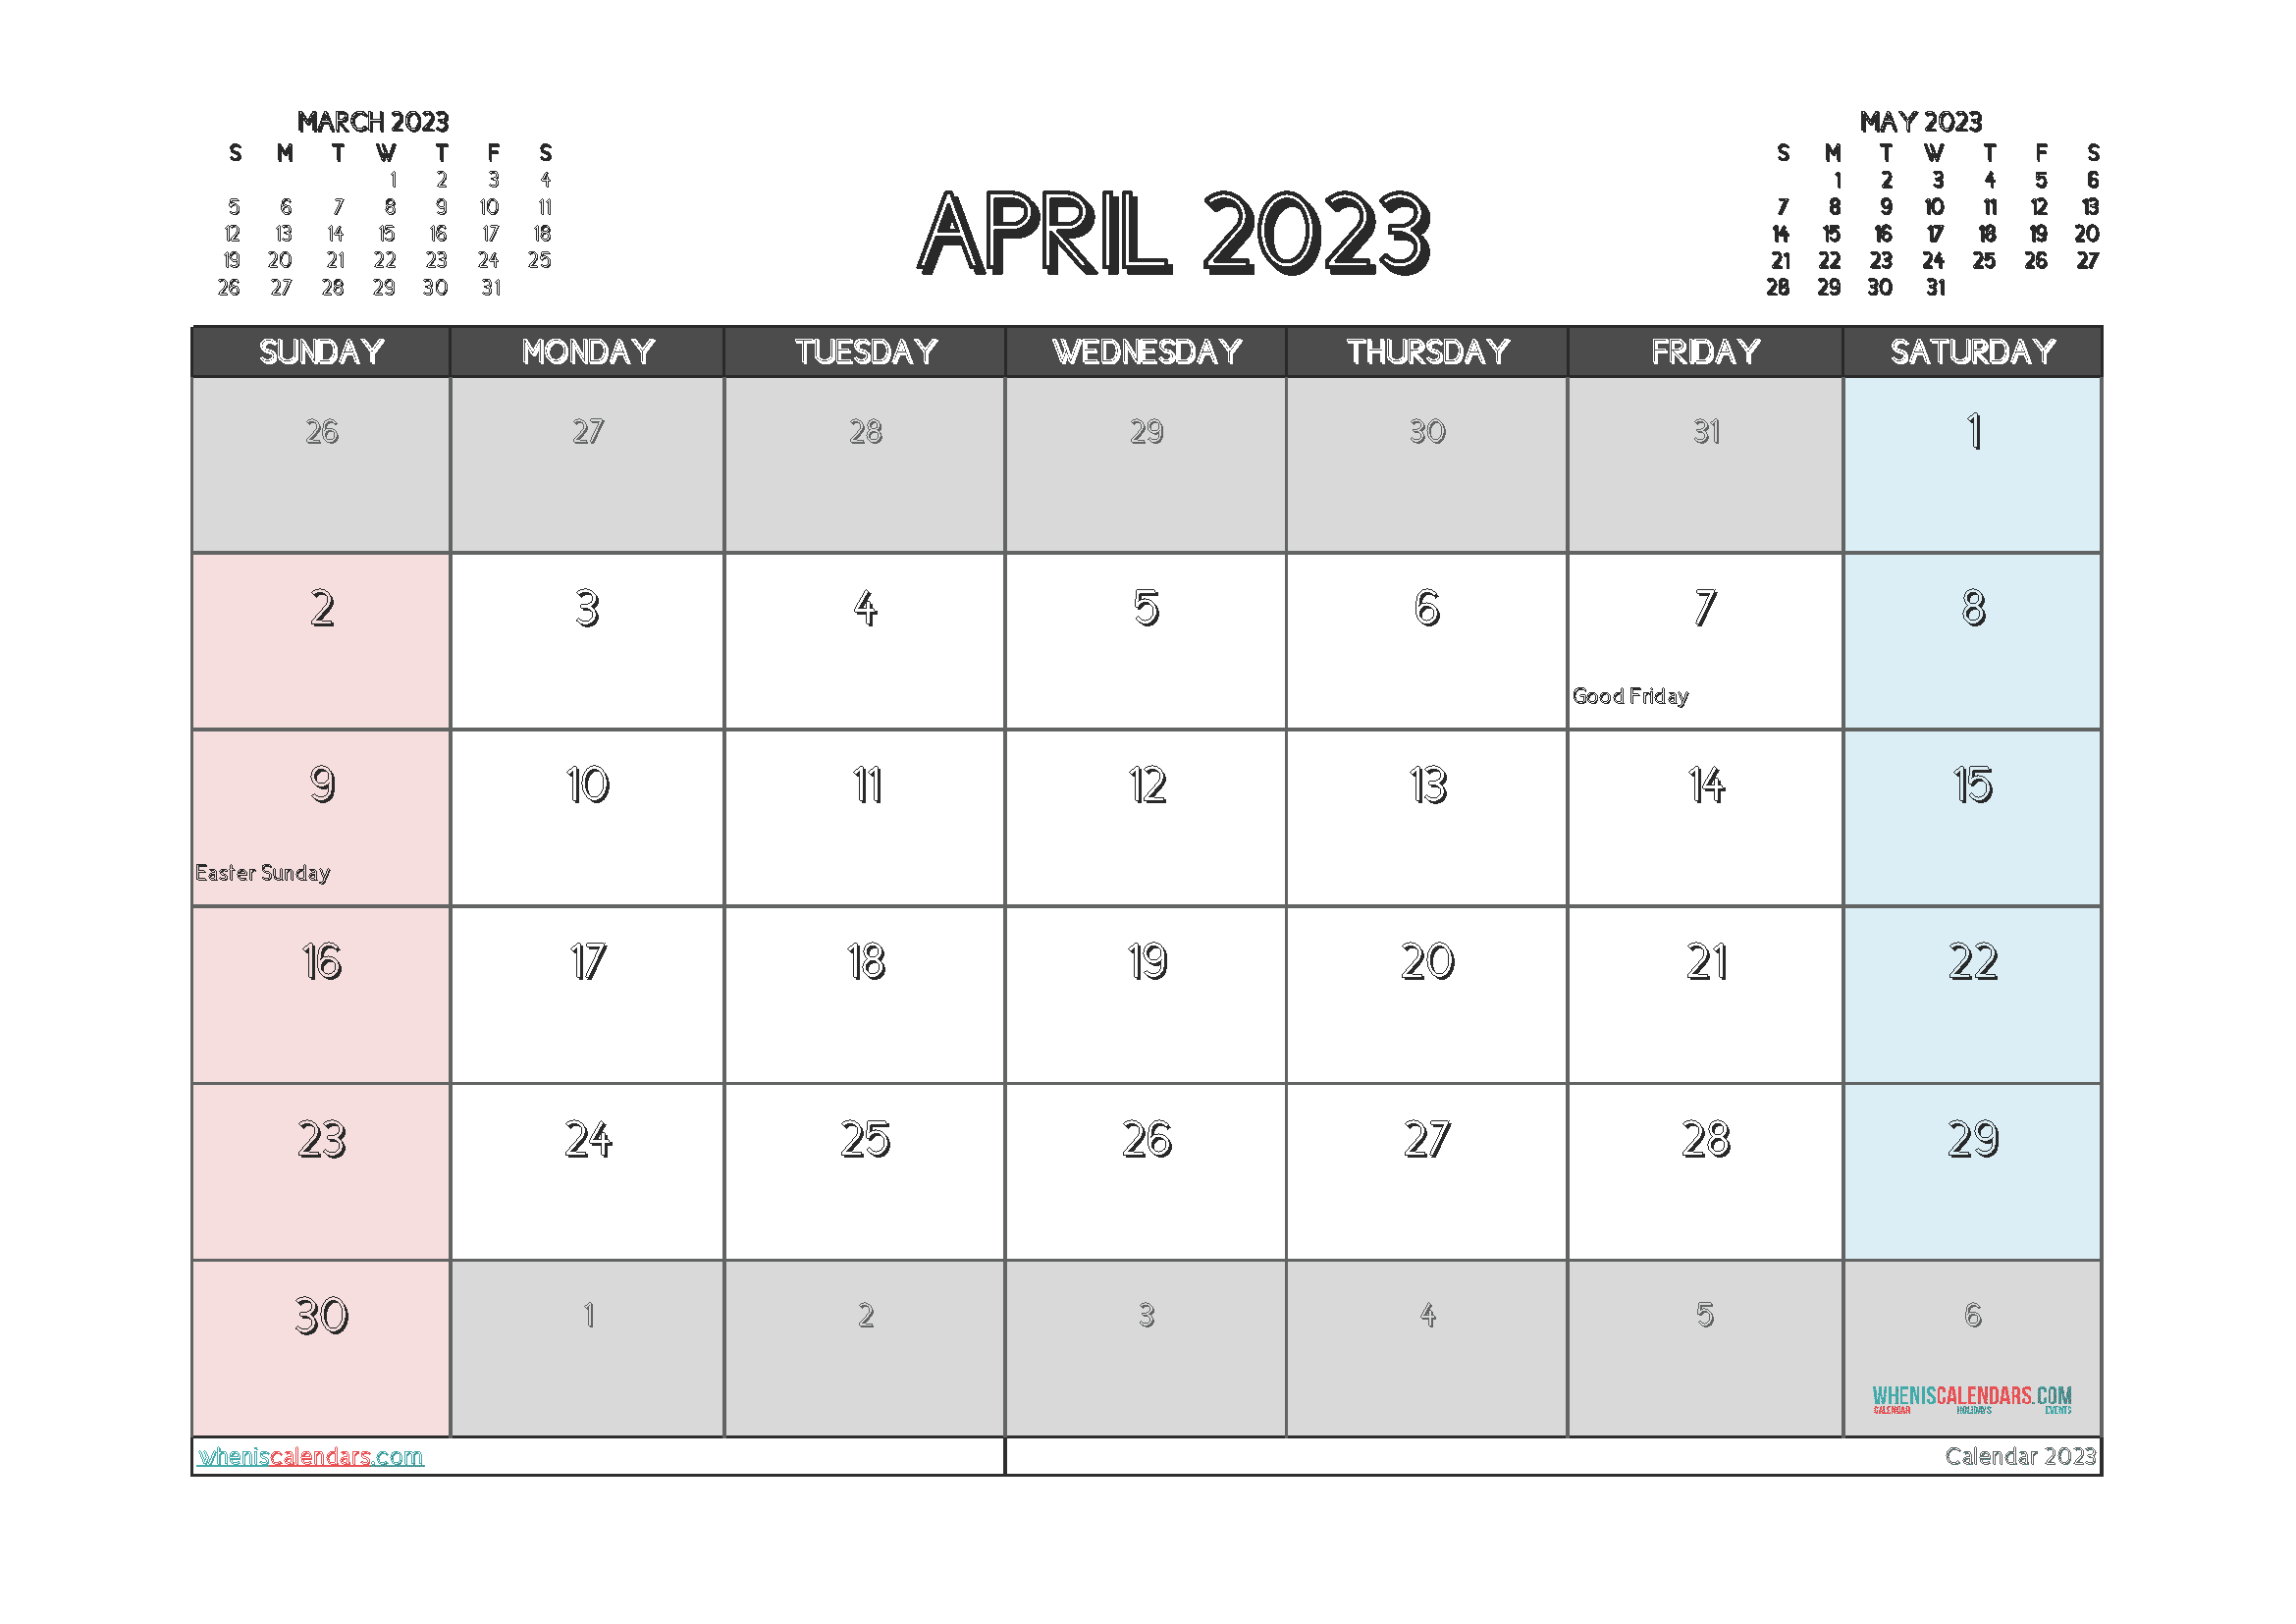 Free Printable Calendar 2023 April with Holidays PDF in Landscape